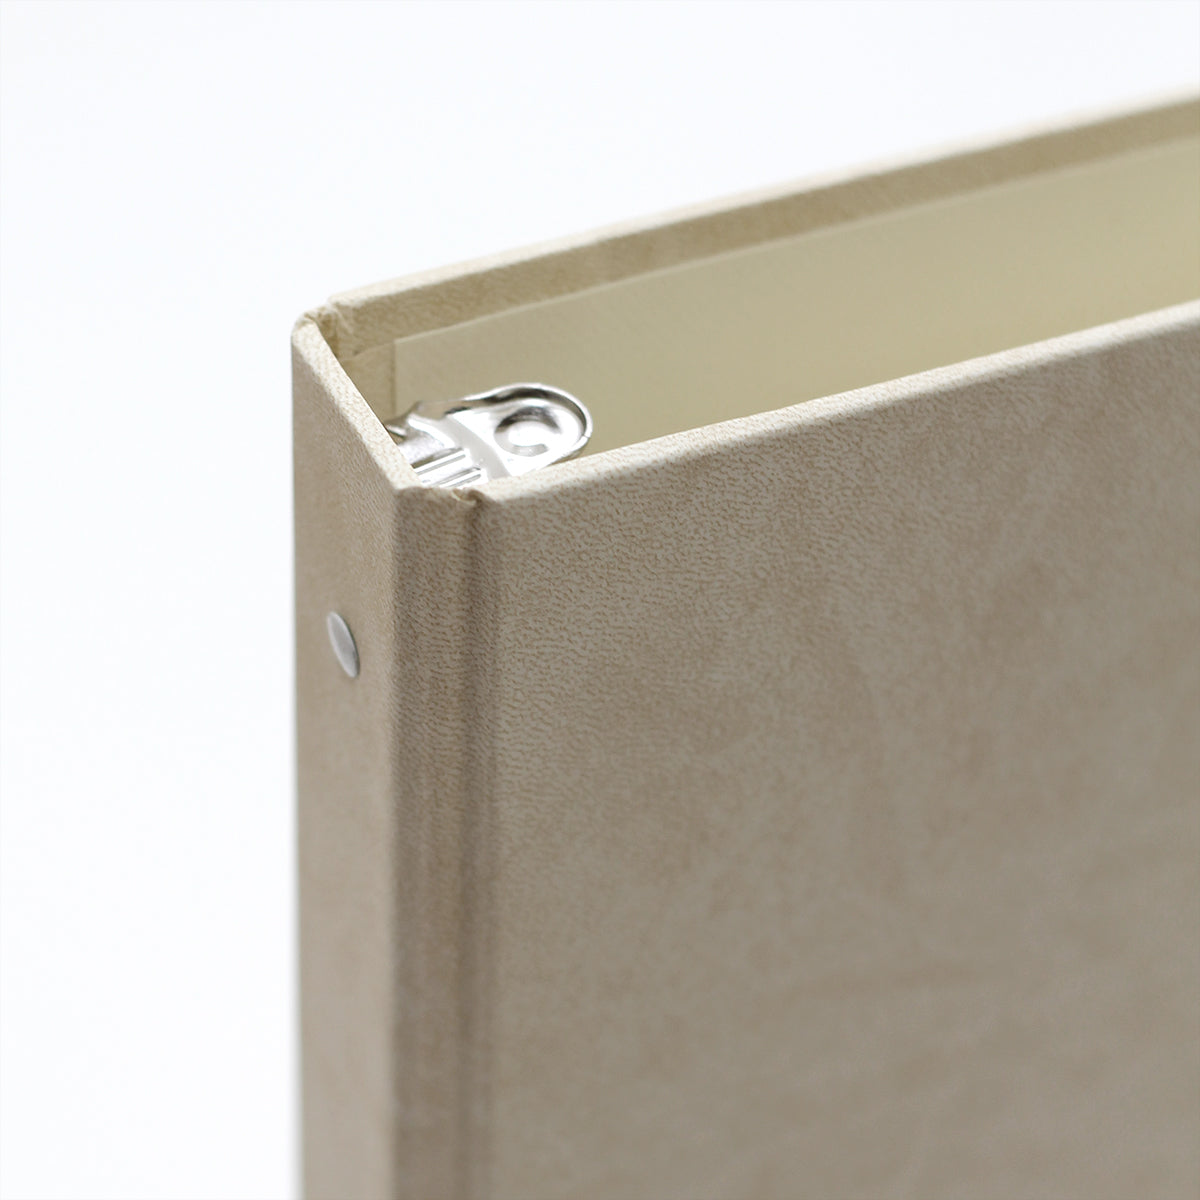 Storage Binder for Photos or Documents with Cream Vegan Leather Cover